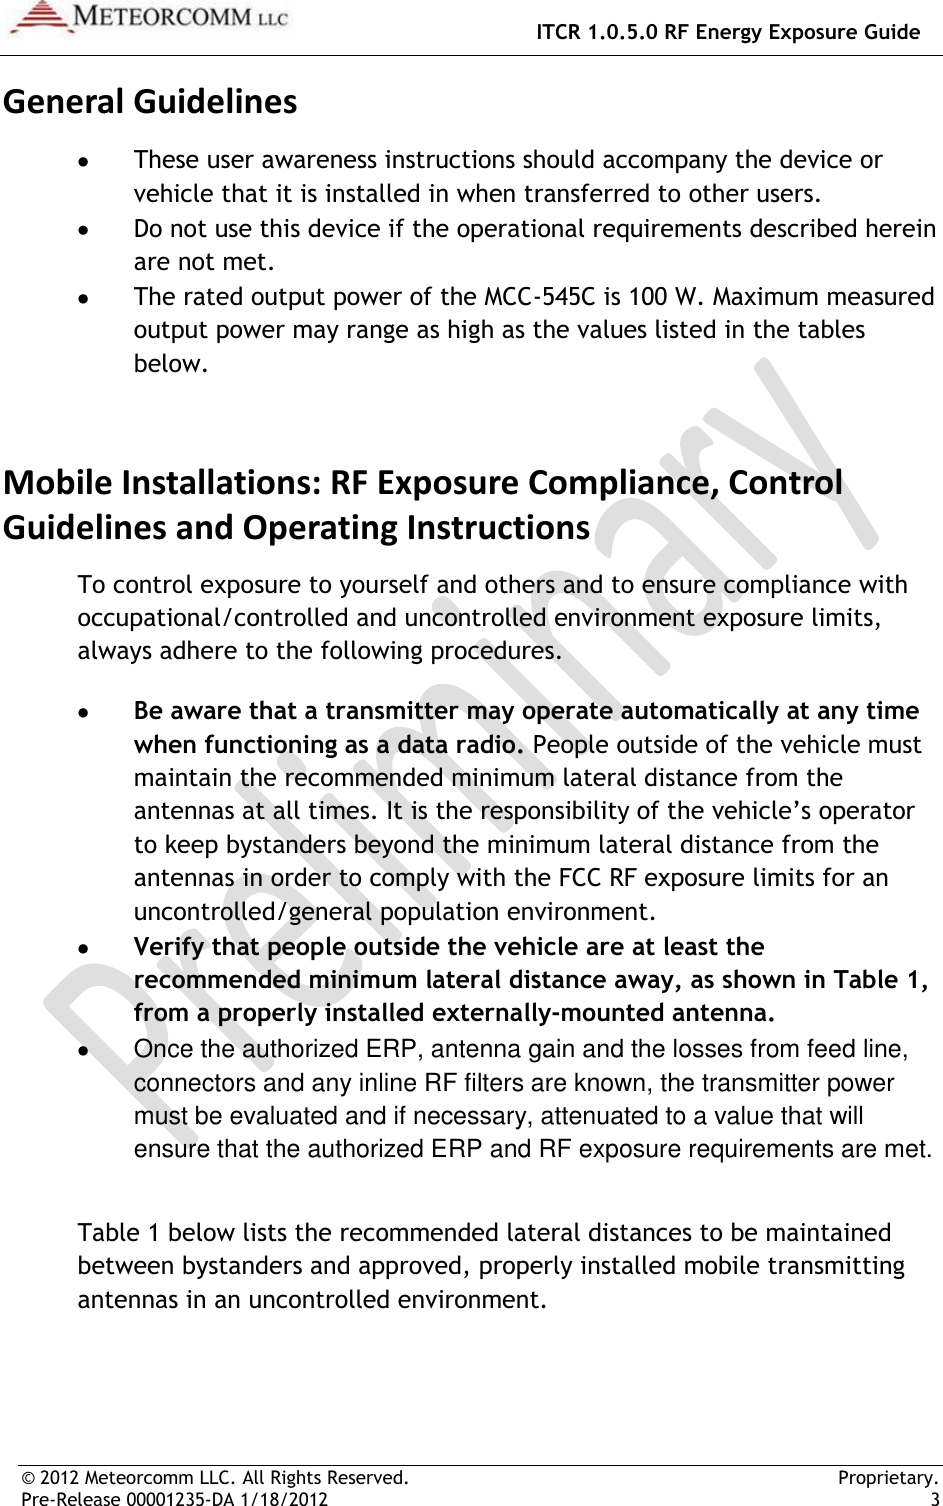   ITCR 1.0.5.0 RF Energy Exposure Guide © 2012 Meteorcomm LLC. All Rights Reserved.     Proprietary. Pre-Release 00001235-DA 1/18/2012    3  General Guidelines  These user awareness instructions should accompany the device or vehicle that it is installed in when transferred to other users.  Do not use this device if the operational requirements described herein are not met.  The rated output power of the MCC-545C is 100 W. Maximum measured output power may range as high as the values listed in the tables below. Mobile Installations: RF Exposure Compliance, Control Guidelines and Operating Instructions To control exposure to yourself and others and to ensure compliance with occupational/controlled and uncontrolled environment exposure limits, always adhere to the following procedures.  Be aware that a transmitter may operate automatically at any time when functioning as a data radio. People outside of the vehicle must maintain the recommended minimum lateral distance from the antennas at all times. It is the responsibility of the vehicle’s operator to keep bystanders beyond the minimum lateral distance from the antennas in order to comply with the FCC RF exposure limits for an uncontrolled/general population environment.  Verify that people outside the vehicle are at least the recommended minimum lateral distance away, as shown in Table 1, from a properly installed externally-mounted antenna.   Once the authorized ERP, antenna gain and the losses from feed line, connectors and any inline RF filters are known, the transmitter power must be evaluated and if necessary, attenuated to a value that will ensure that the authorized ERP and RF exposure requirements are met.   Table 1 below lists the recommended lateral distances to be maintained between bystanders and approved, properly installed mobile transmitting antennas in an uncontrolled environment.  